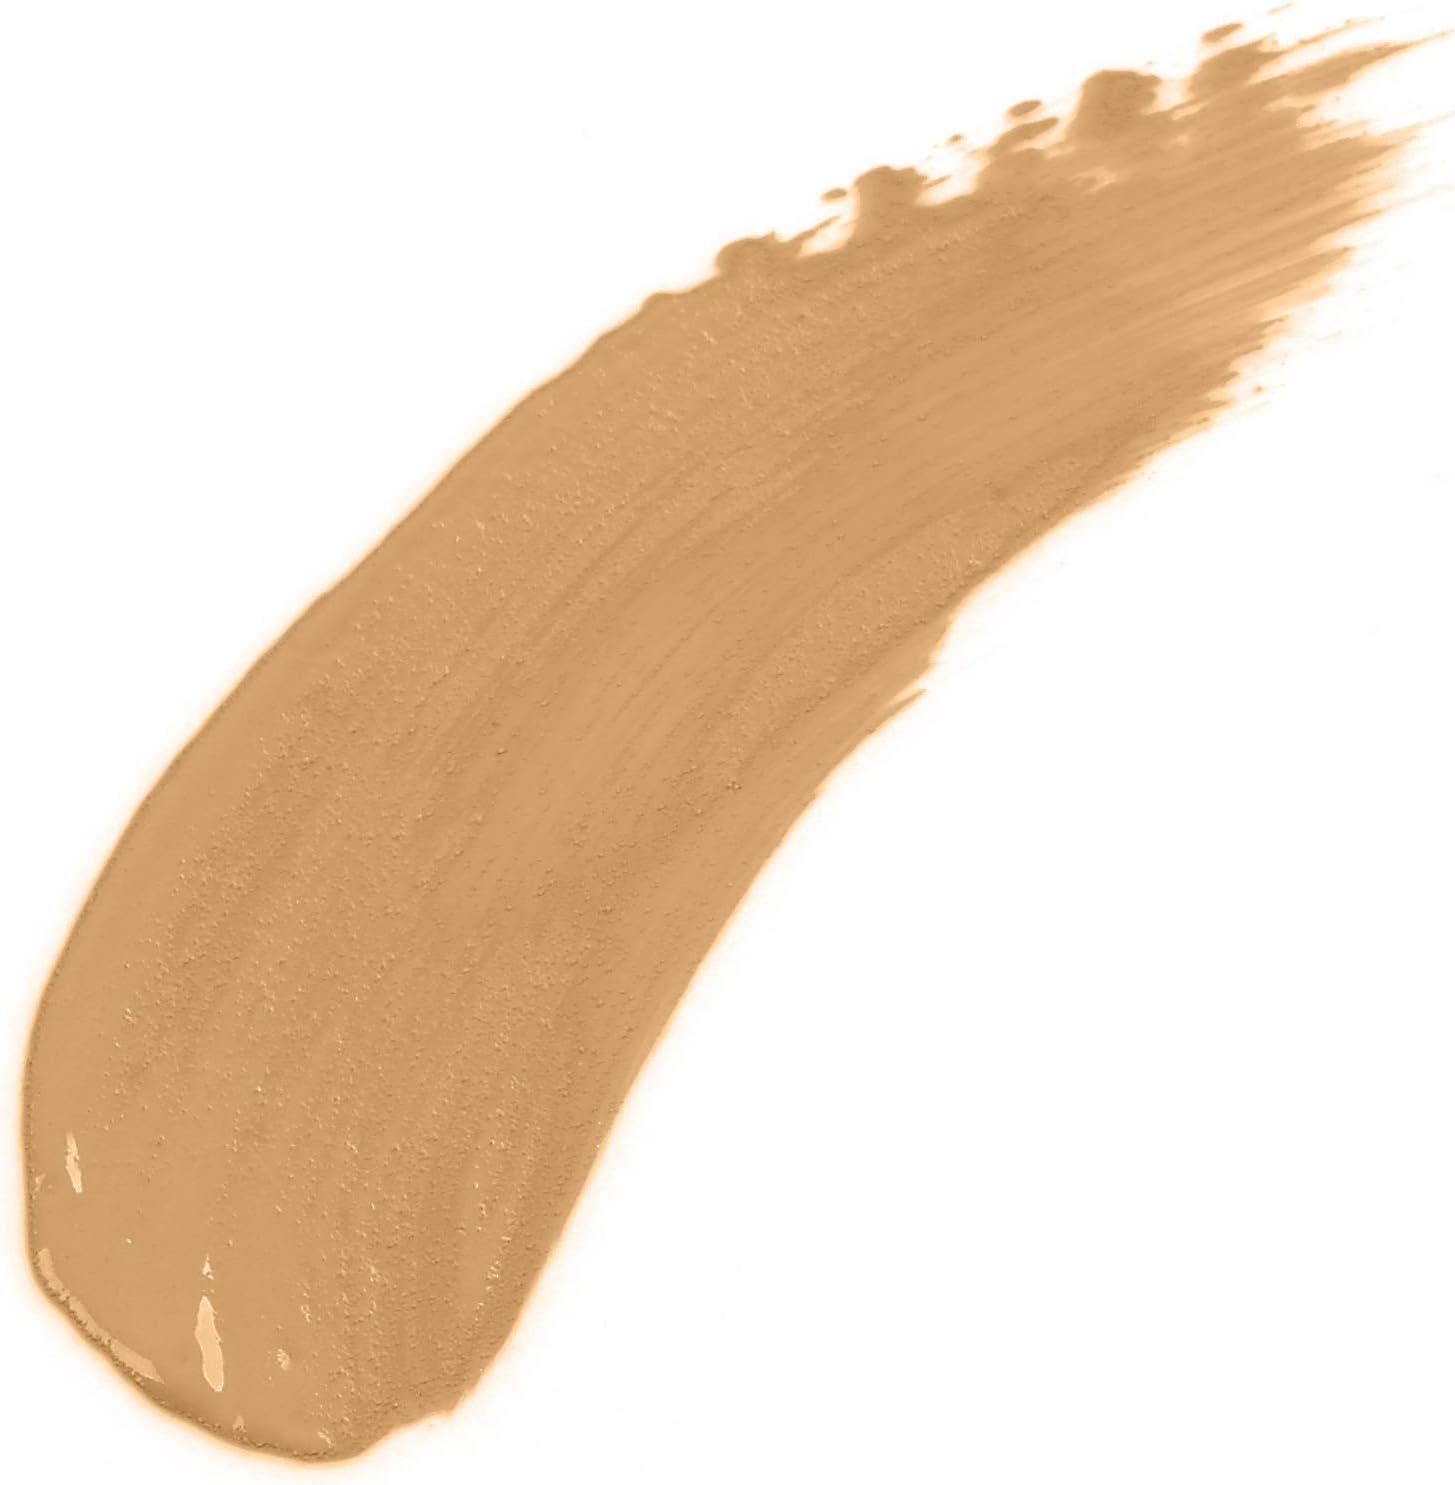 Maybelline Fit Me! Concealer 6.8ml (Various Shades) - FREE Delivery